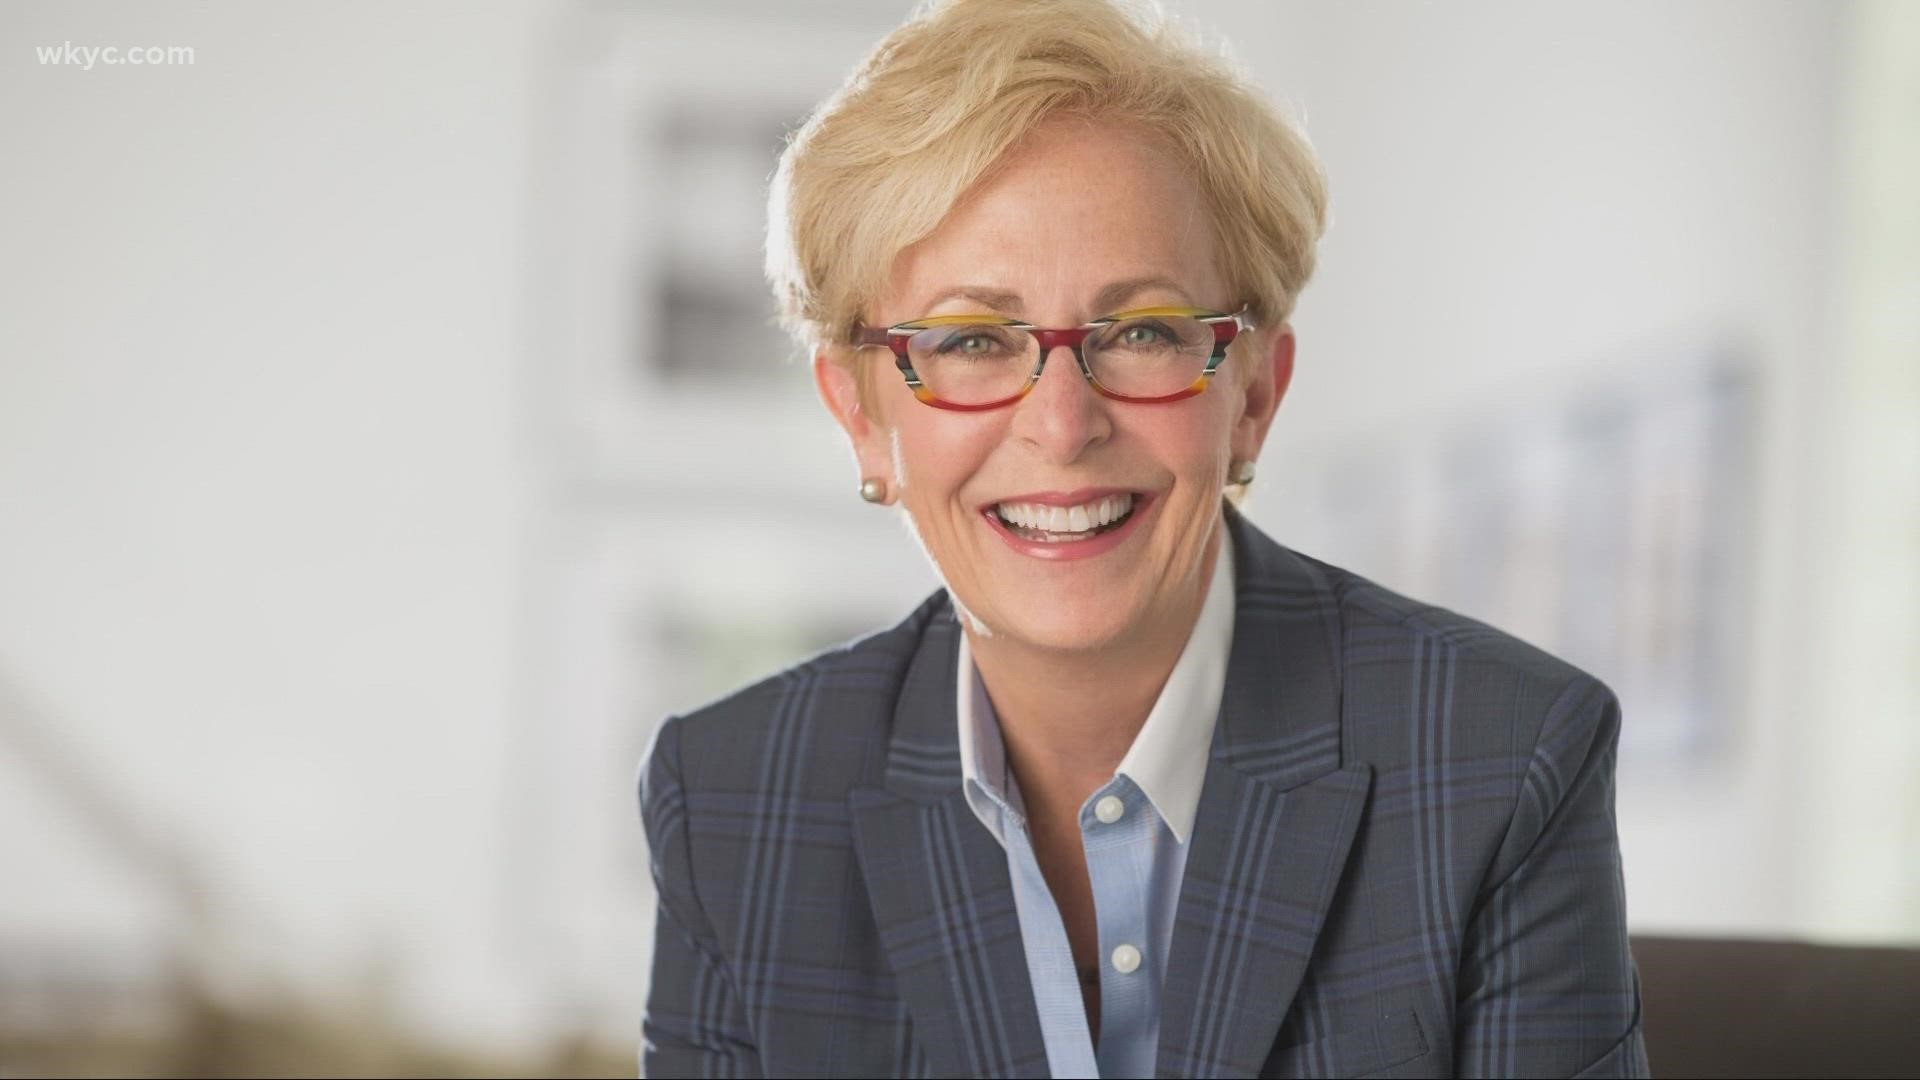 Playhouse Square President and CEO Gina Vernaci announced on Wednesday that she will retire in February 2023. She spent 39 years with the organization.